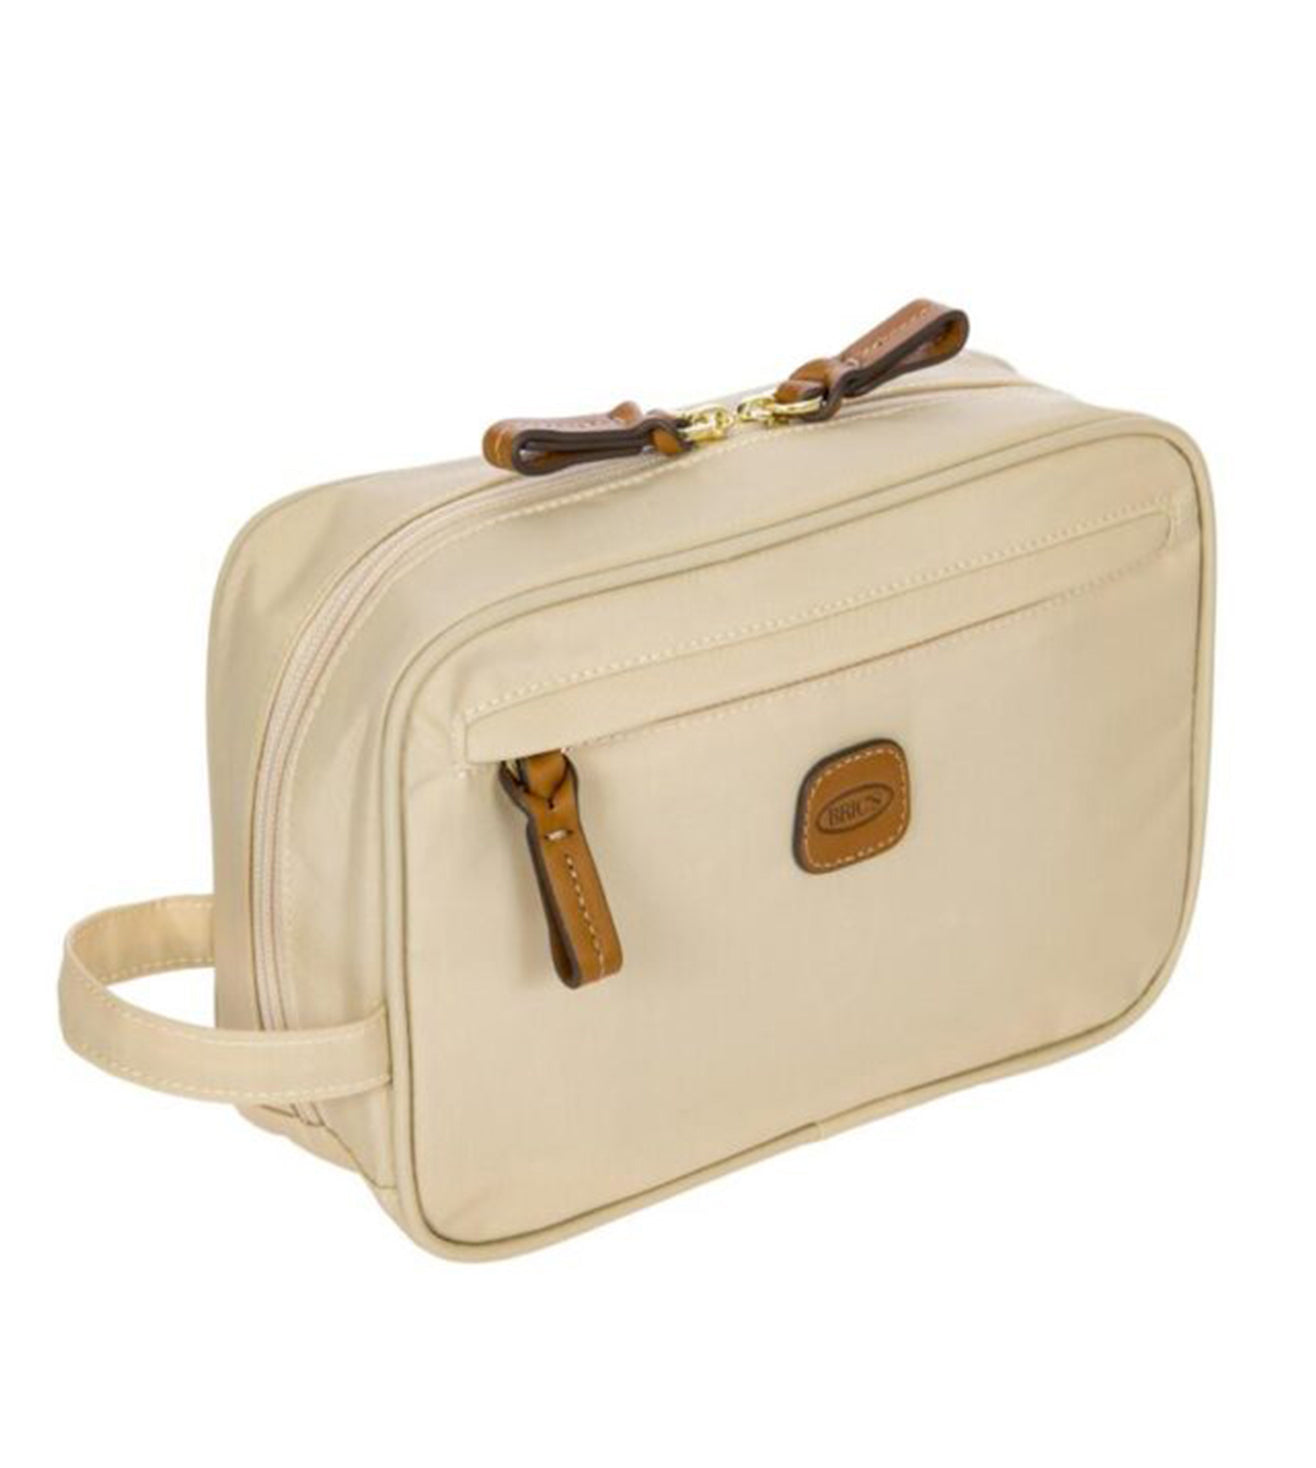 Bric's X-Collection Unisex Toiletry Bag